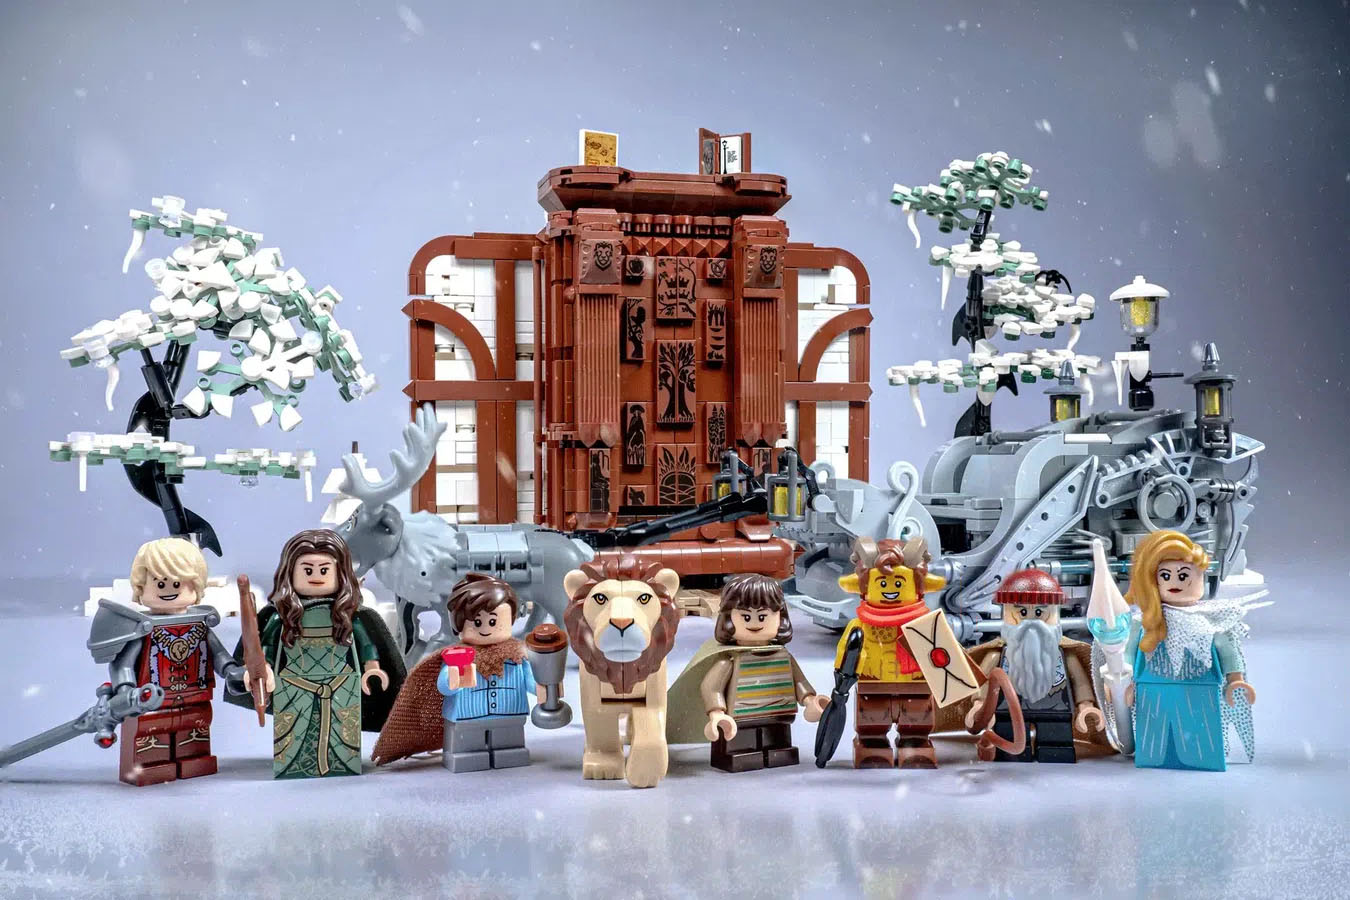 WELCOME TO NARNIA: THE LION, THE WITCH AND THE WARDROBE 75TH ANNIVERSARY SET